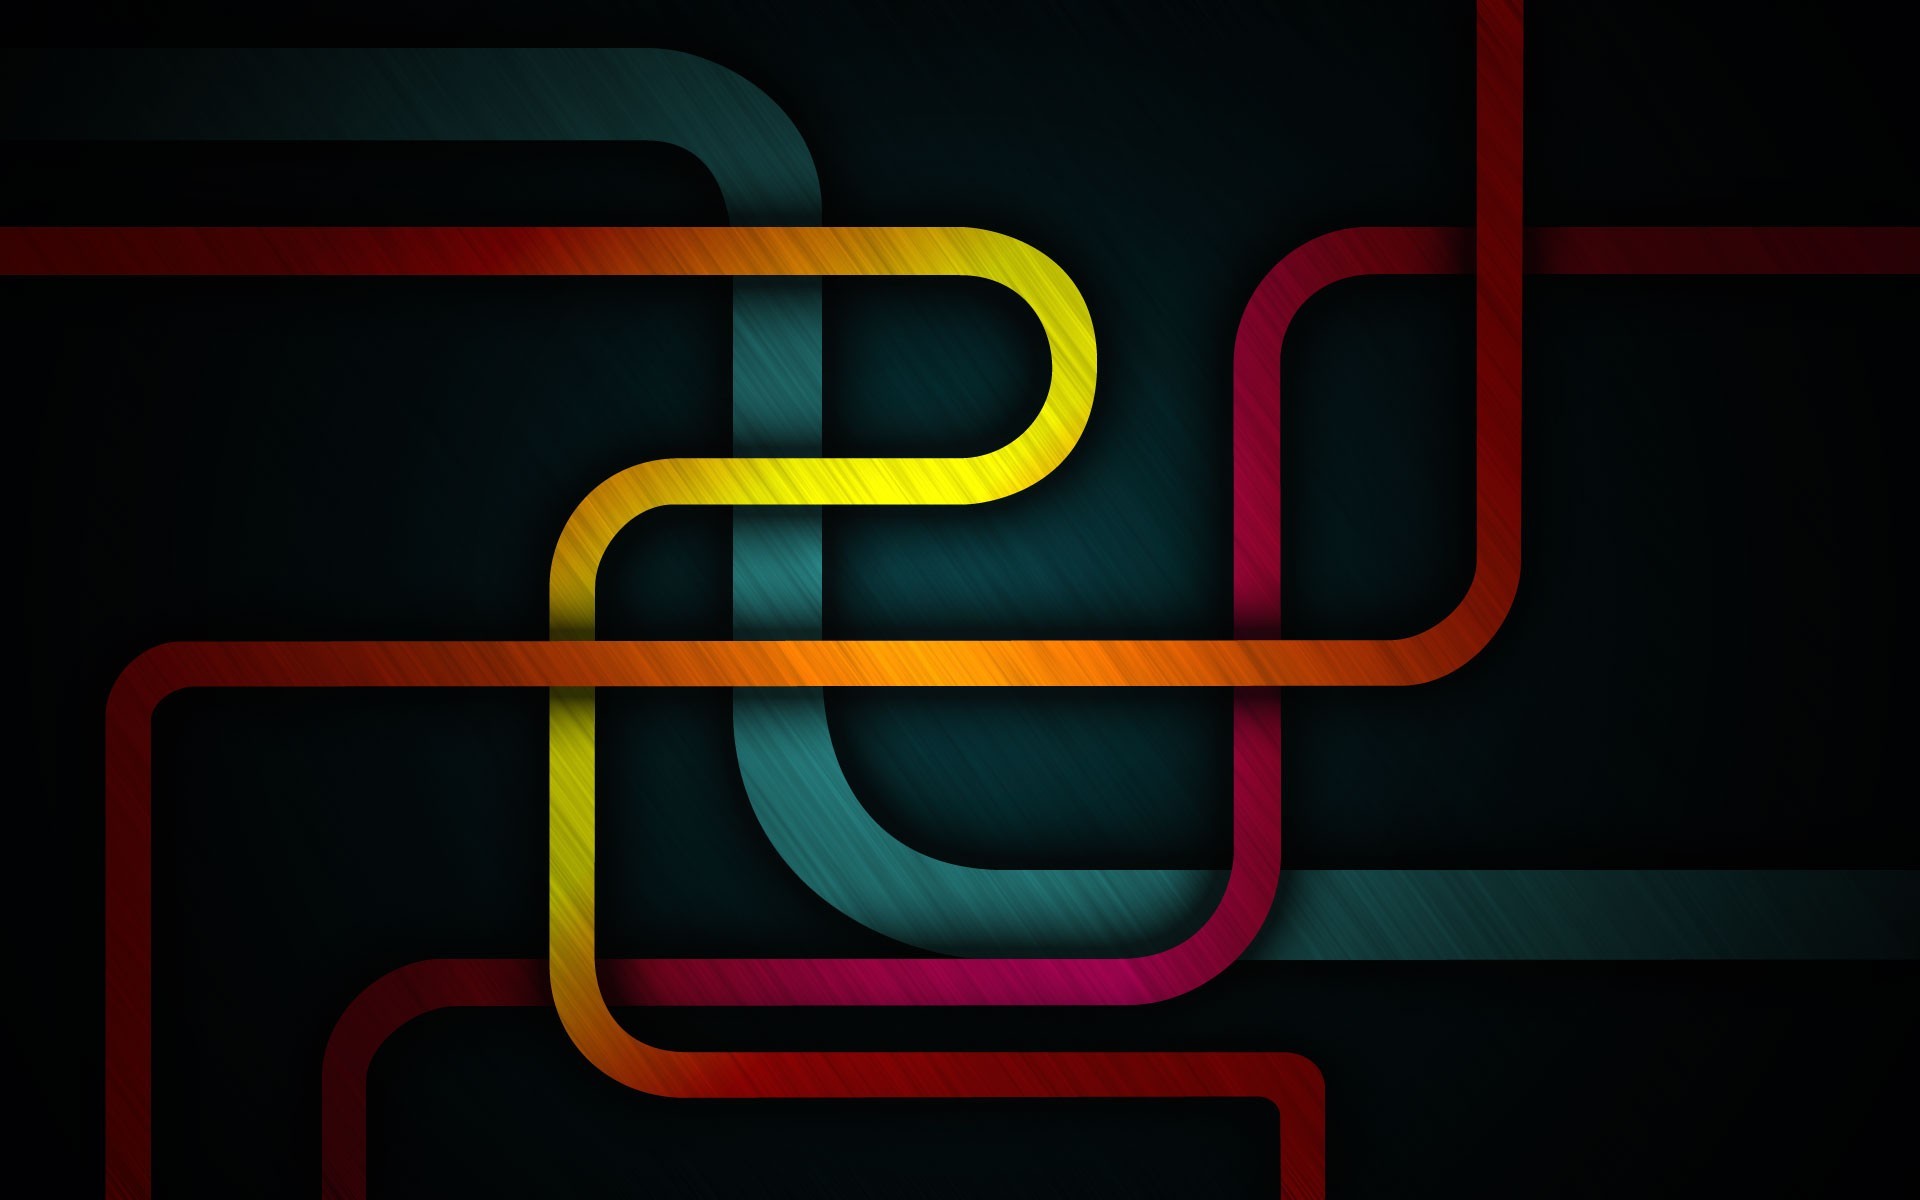 Pipe Background Images HD Pictures and Wallpaper For Free Download   Pngtree